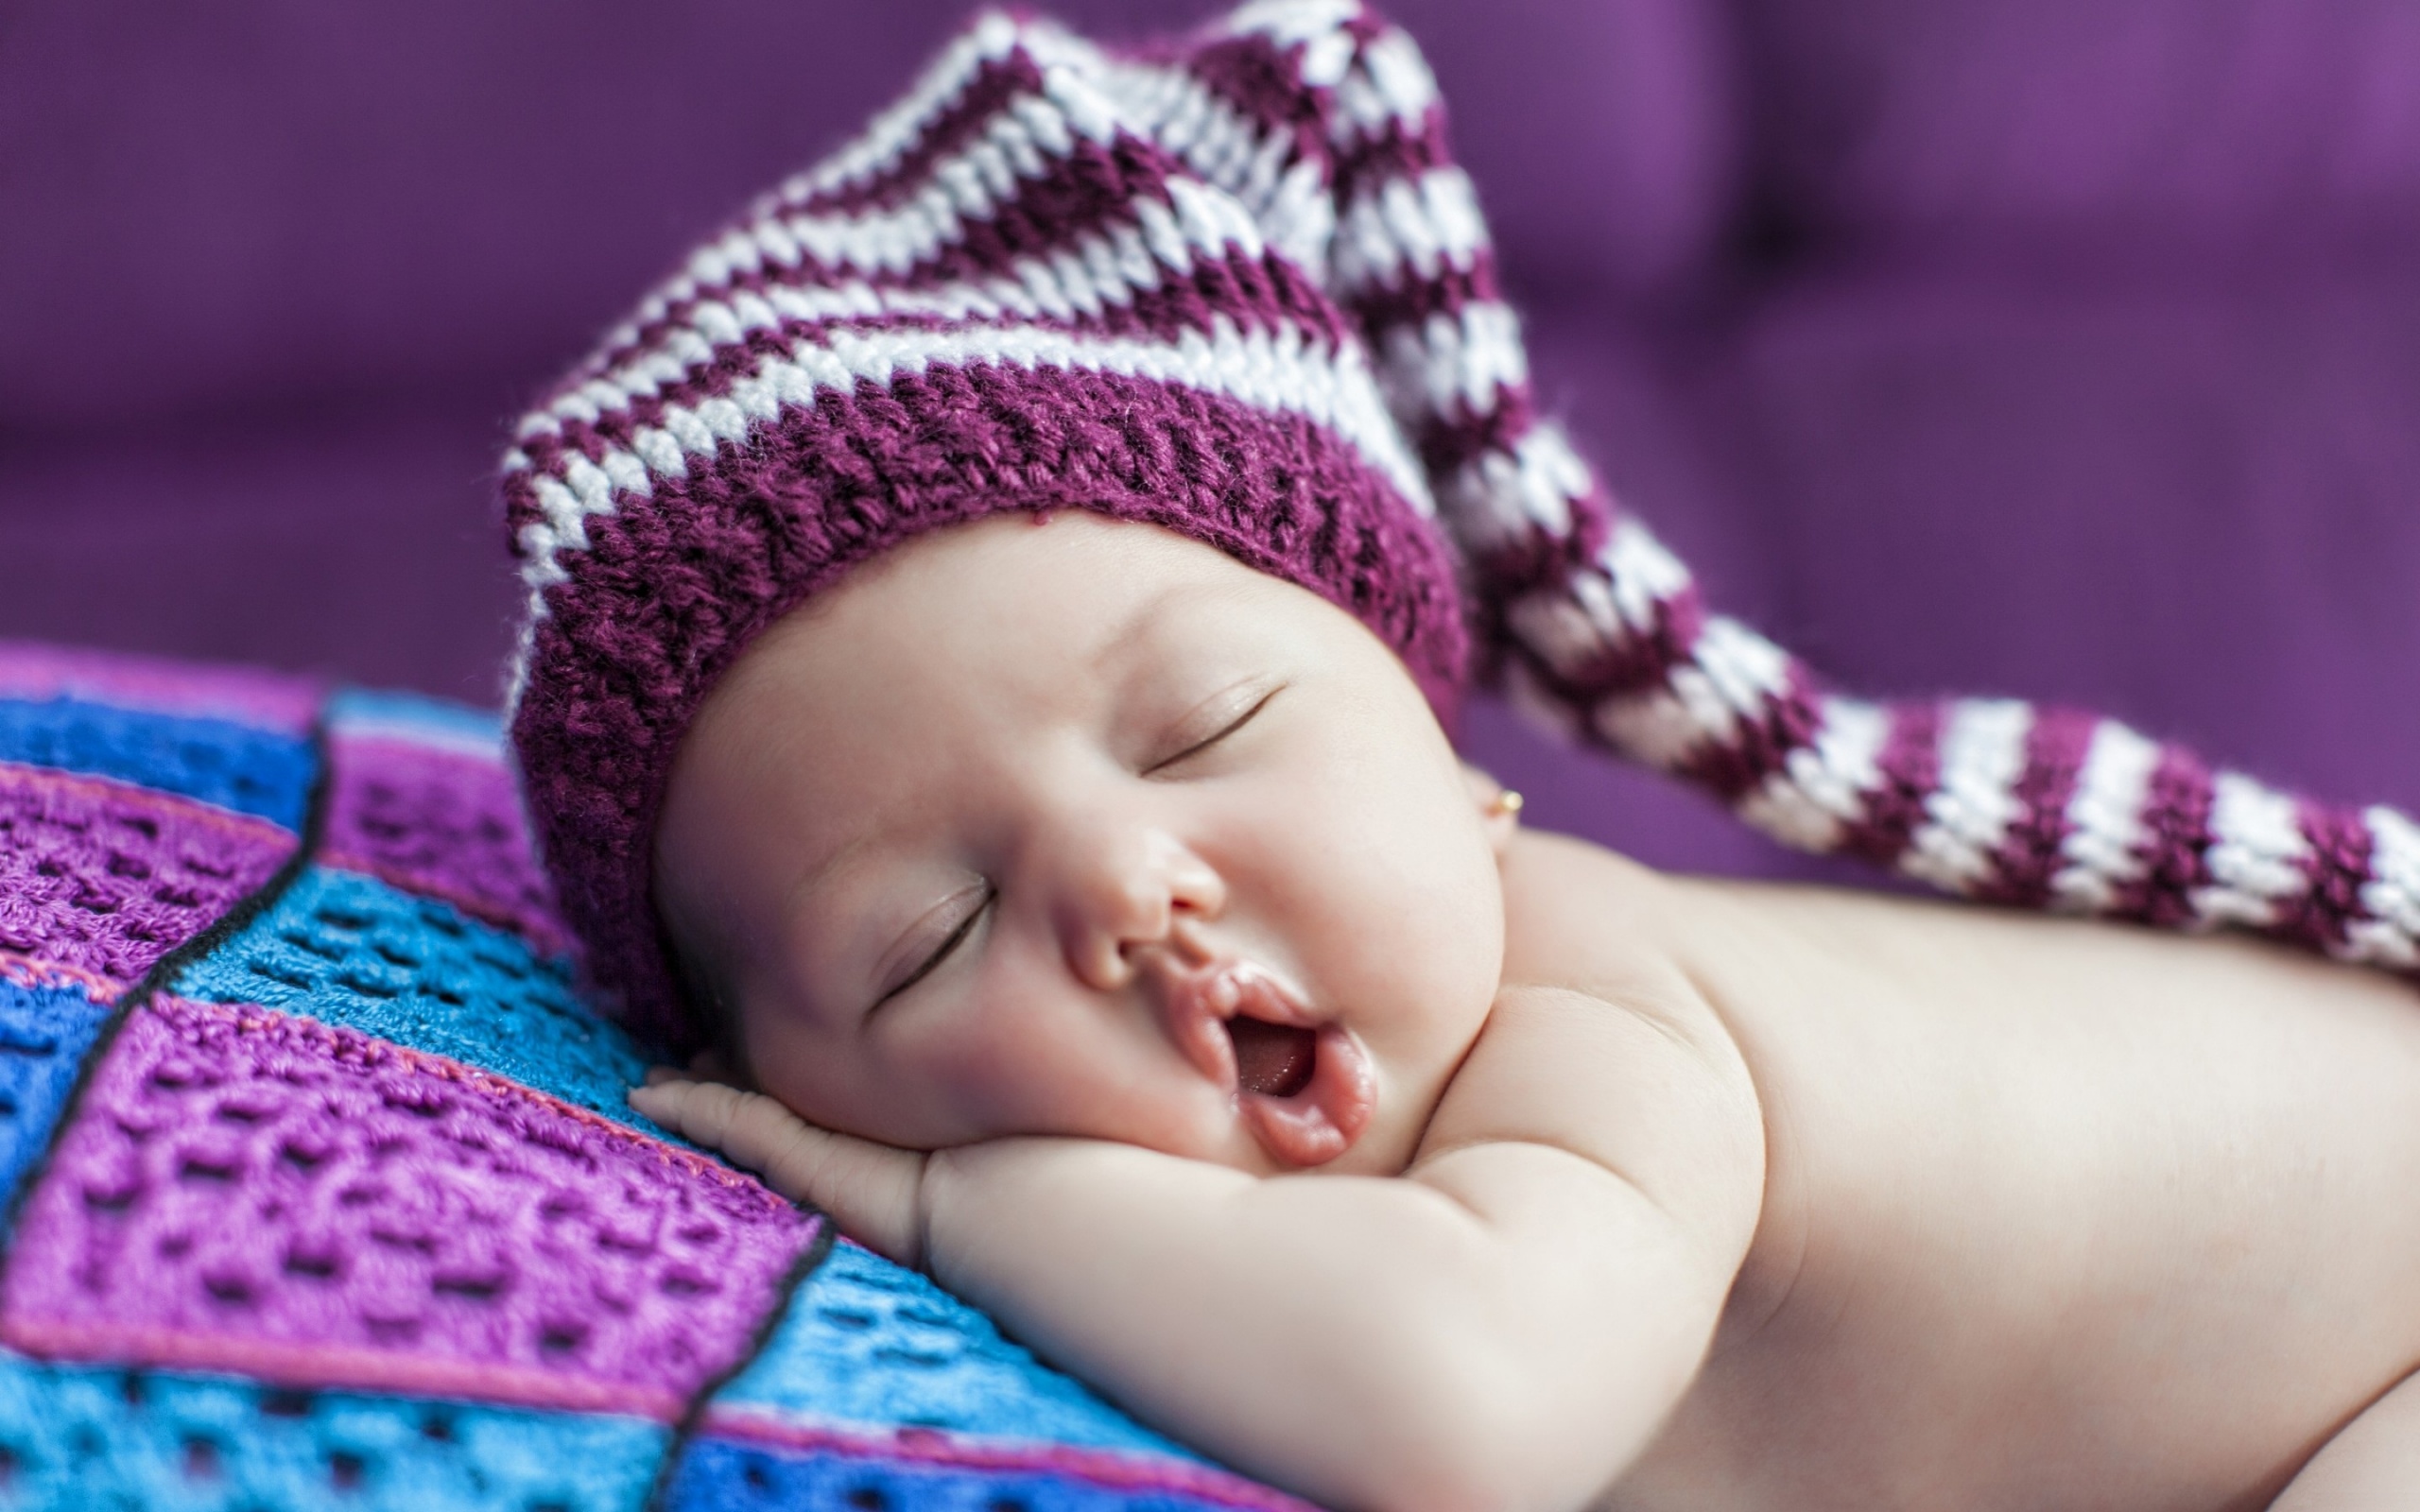 Wallpaper : sleeping, baby, Person, skin, child, girl, 1920x1080 px,  portrait photography, photo shoot, toddler, infant 1920x1080 -  CoolWallpapers - 635015 - HD Wallpapers - WallHere